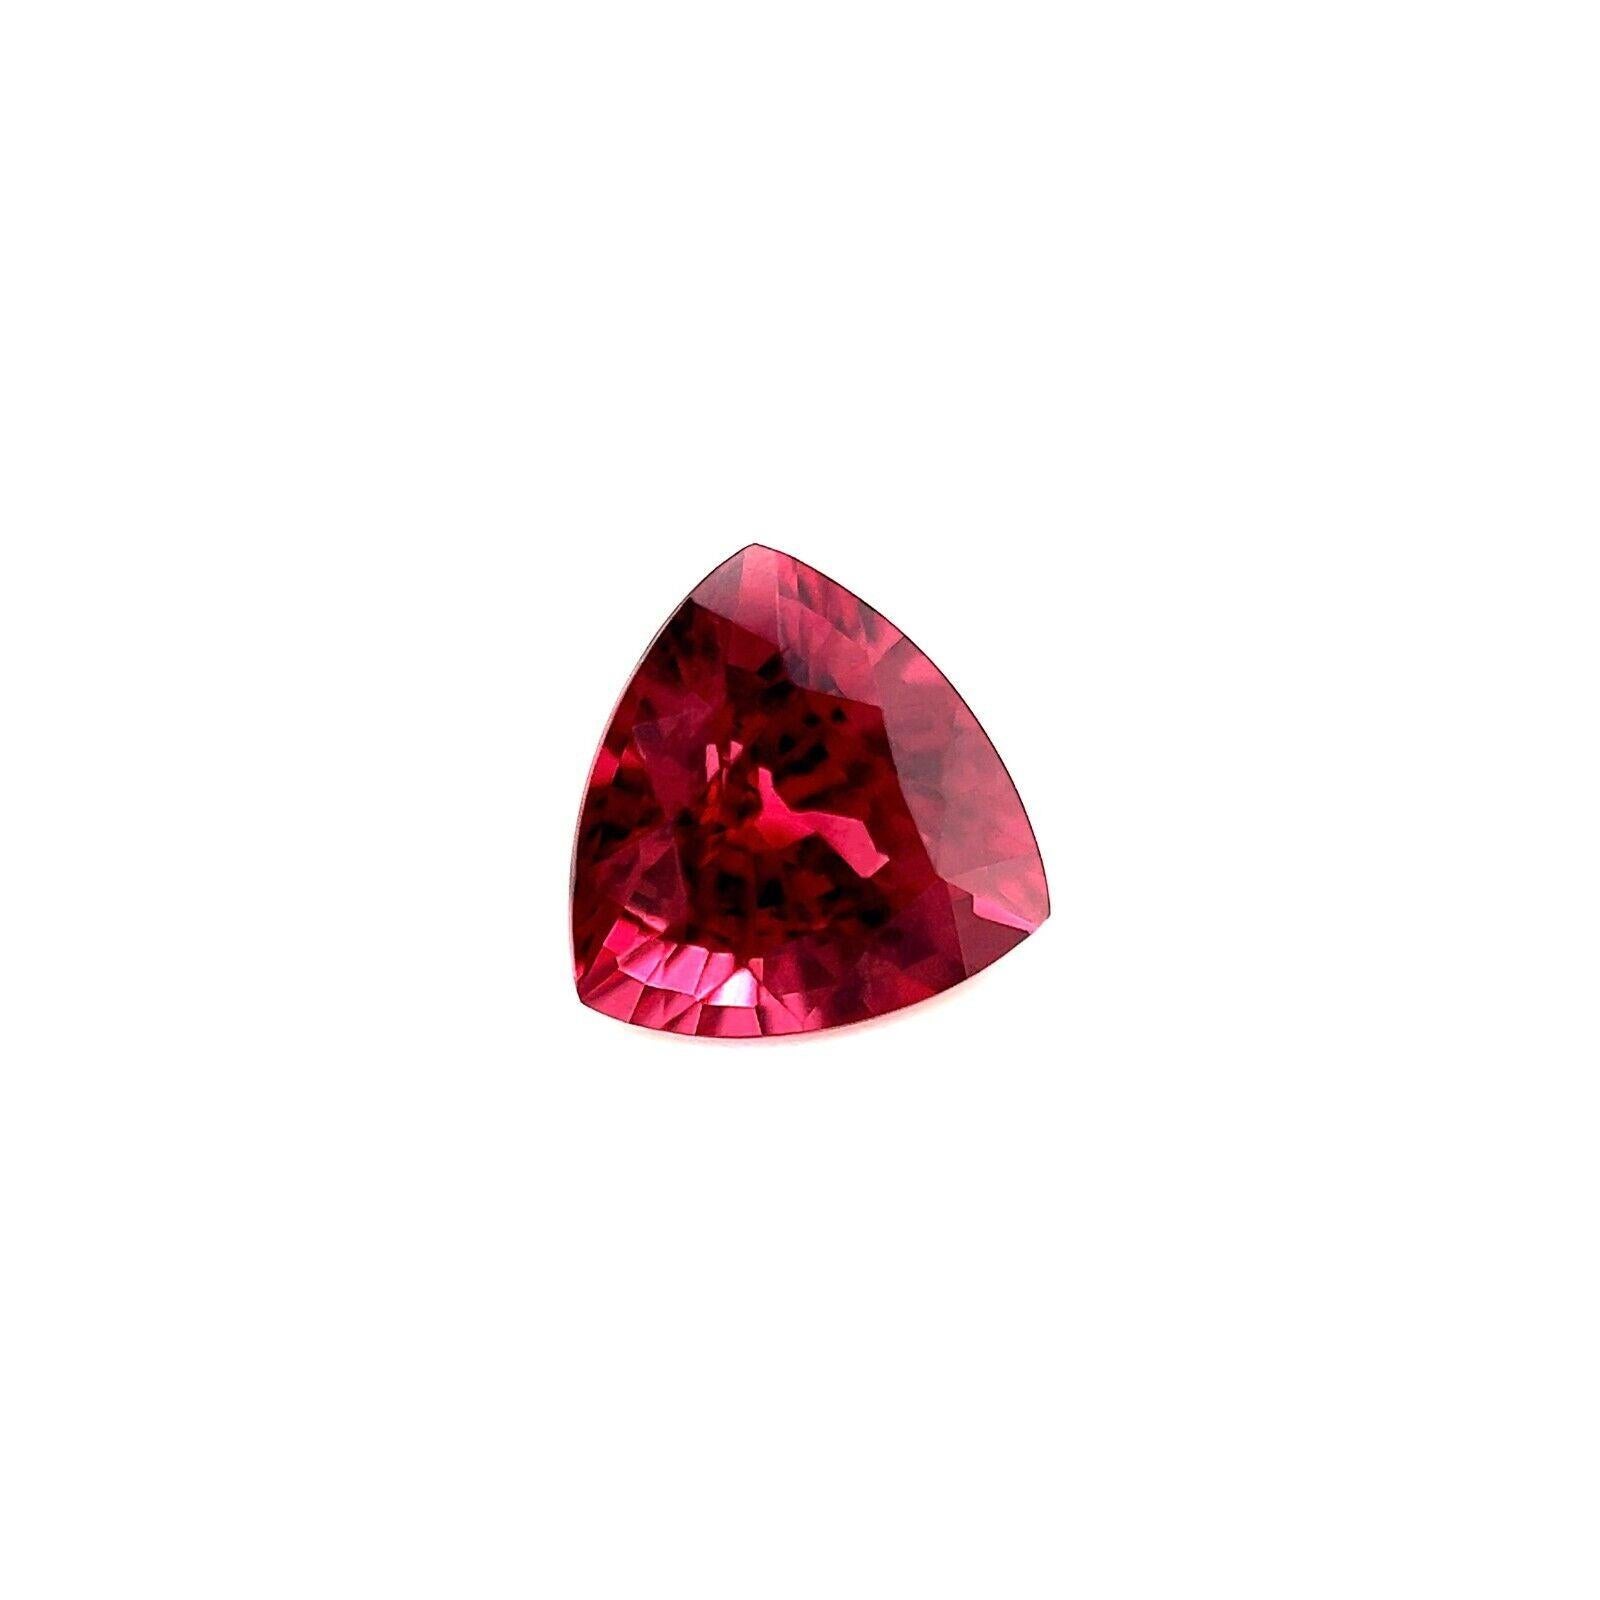 Natural Vivid Purple Pink Rhodolite Garnet 1.25ct Trillion Cut Gem 6.4x6.4mm

Fine Natural Vivid Purple Pink Rhodolite Garnet.
1.25 Carat stone with a beautiful vivid purple pink colour and good clarity, some small natural inclusions visible when